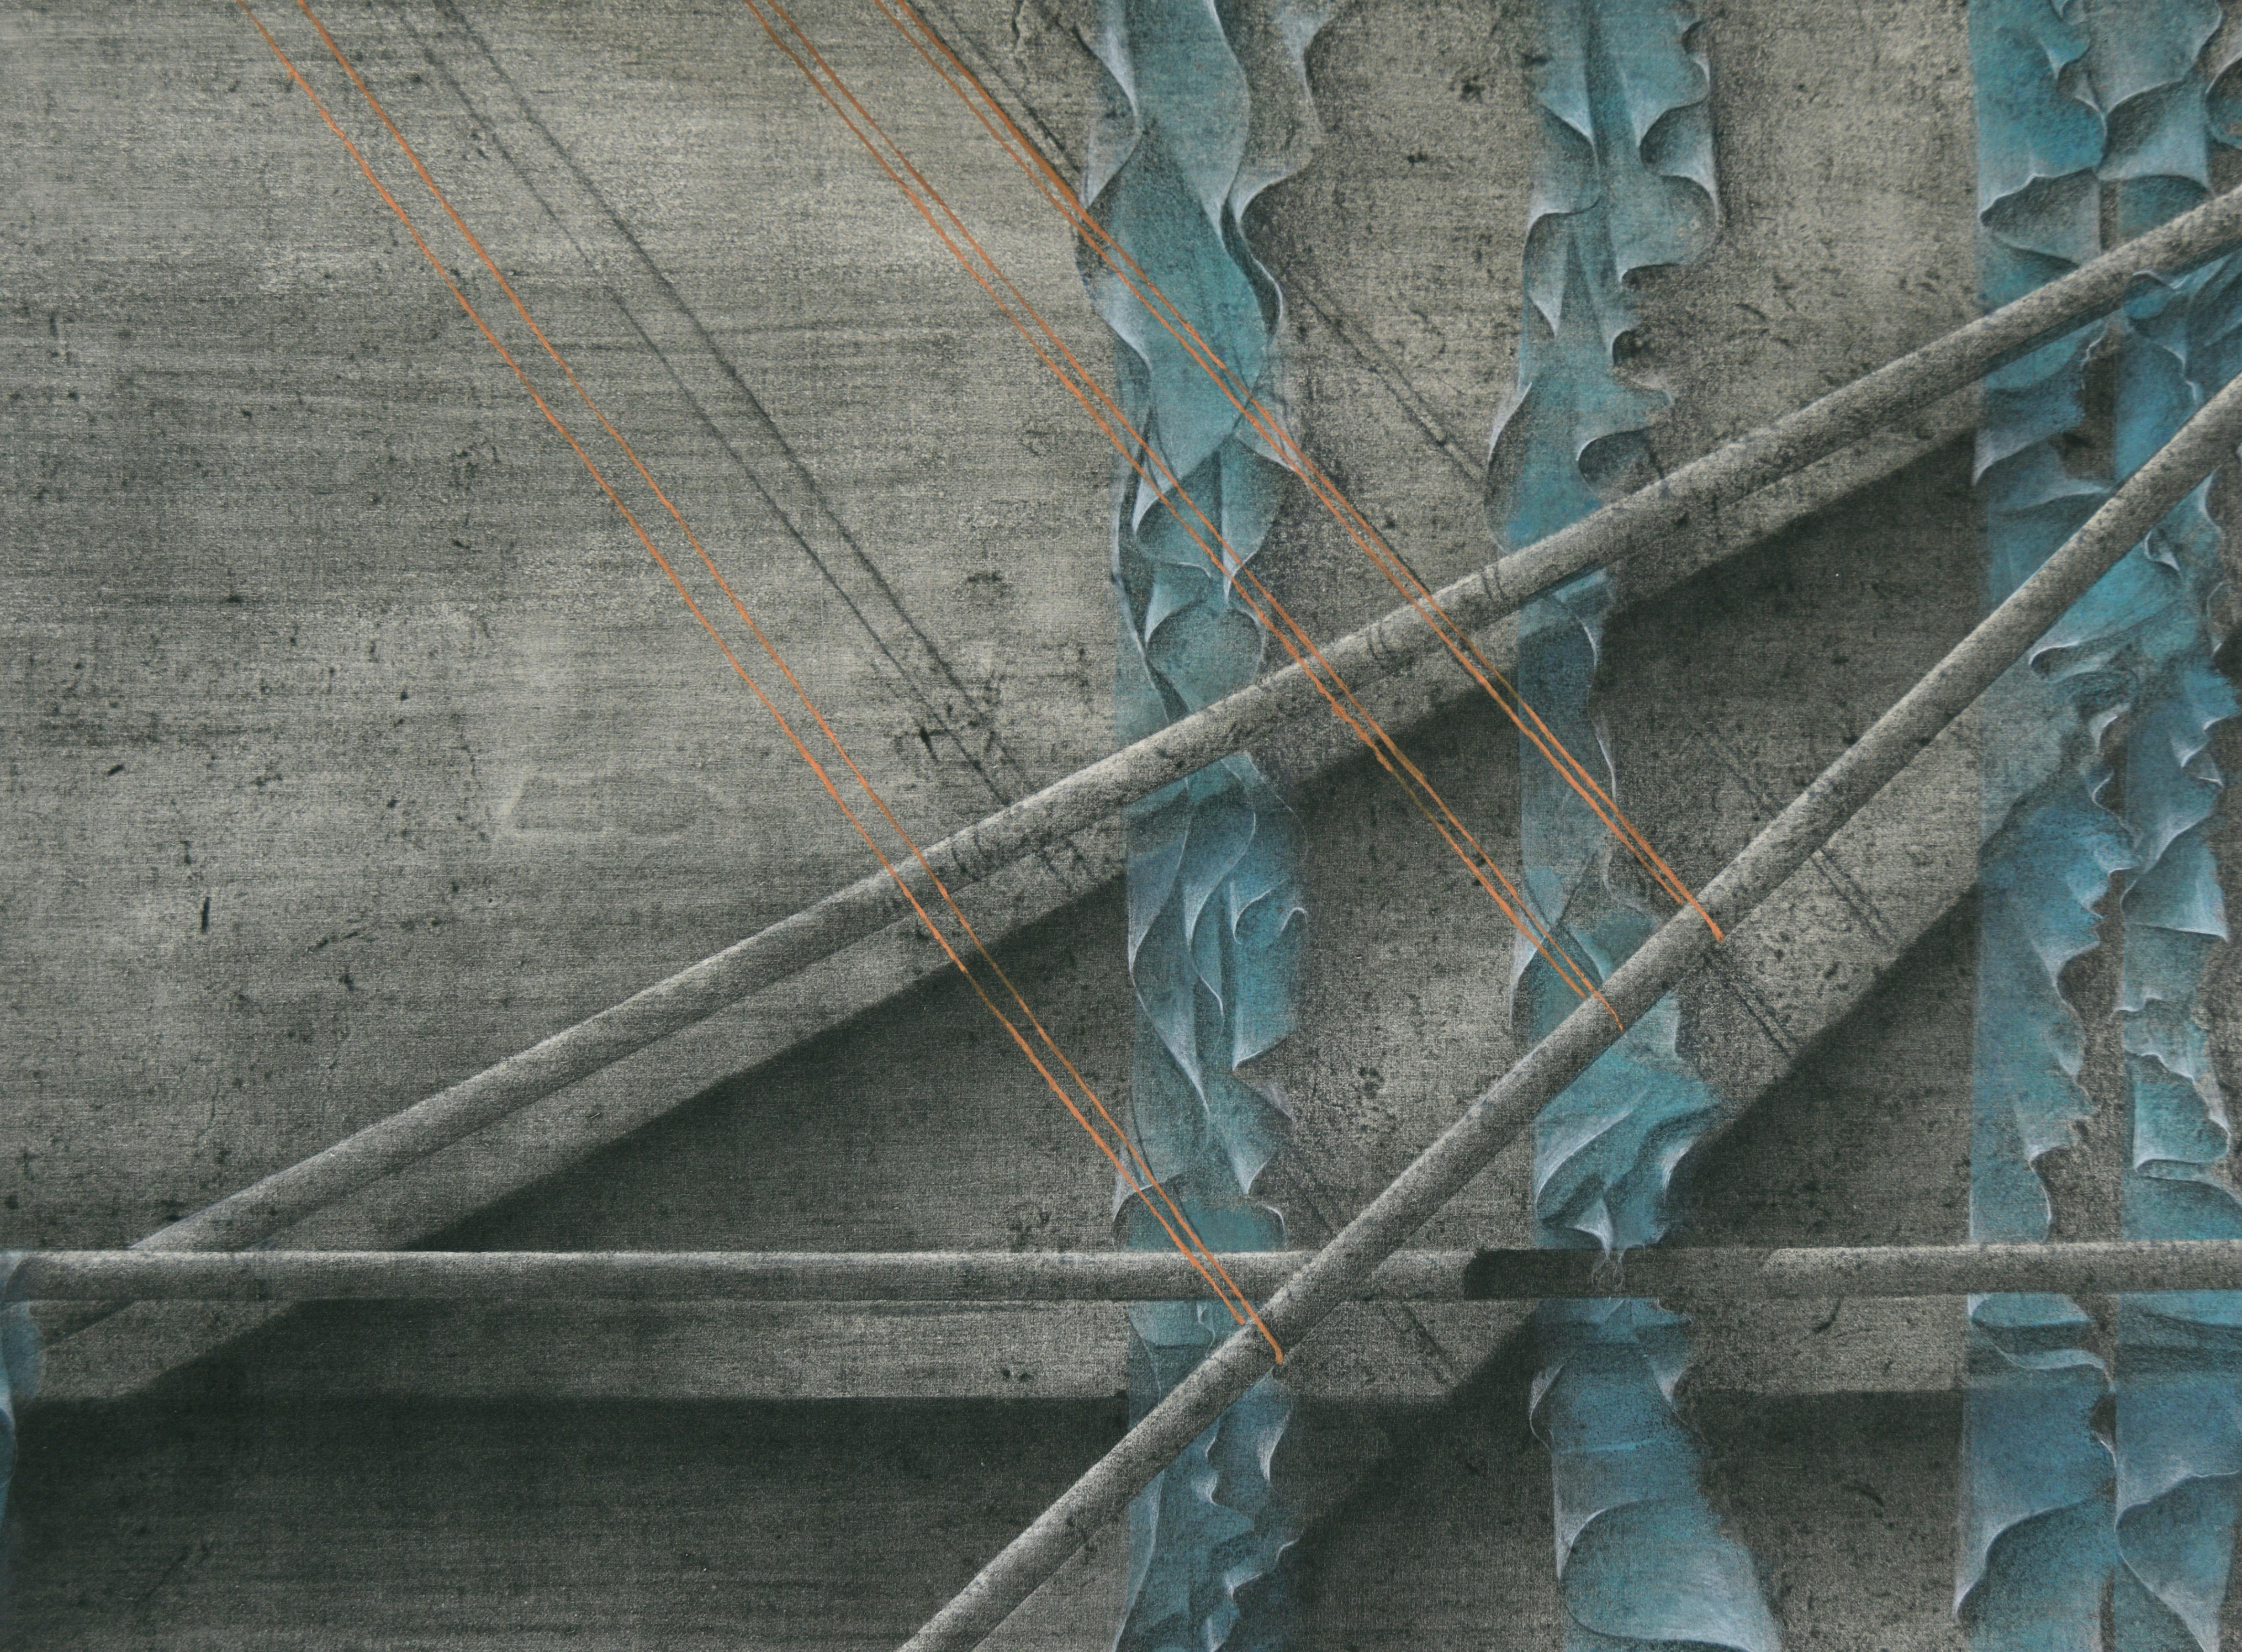 Teal Ribbons and Bronze Thread - Photorealistic Drawing

Highly detailed drawing by Patricia Pearce (American, b. 1948). The base layer of this piece is a collotype, but the ribbons and thread have been drawn on top in painstaking detail. Subtle